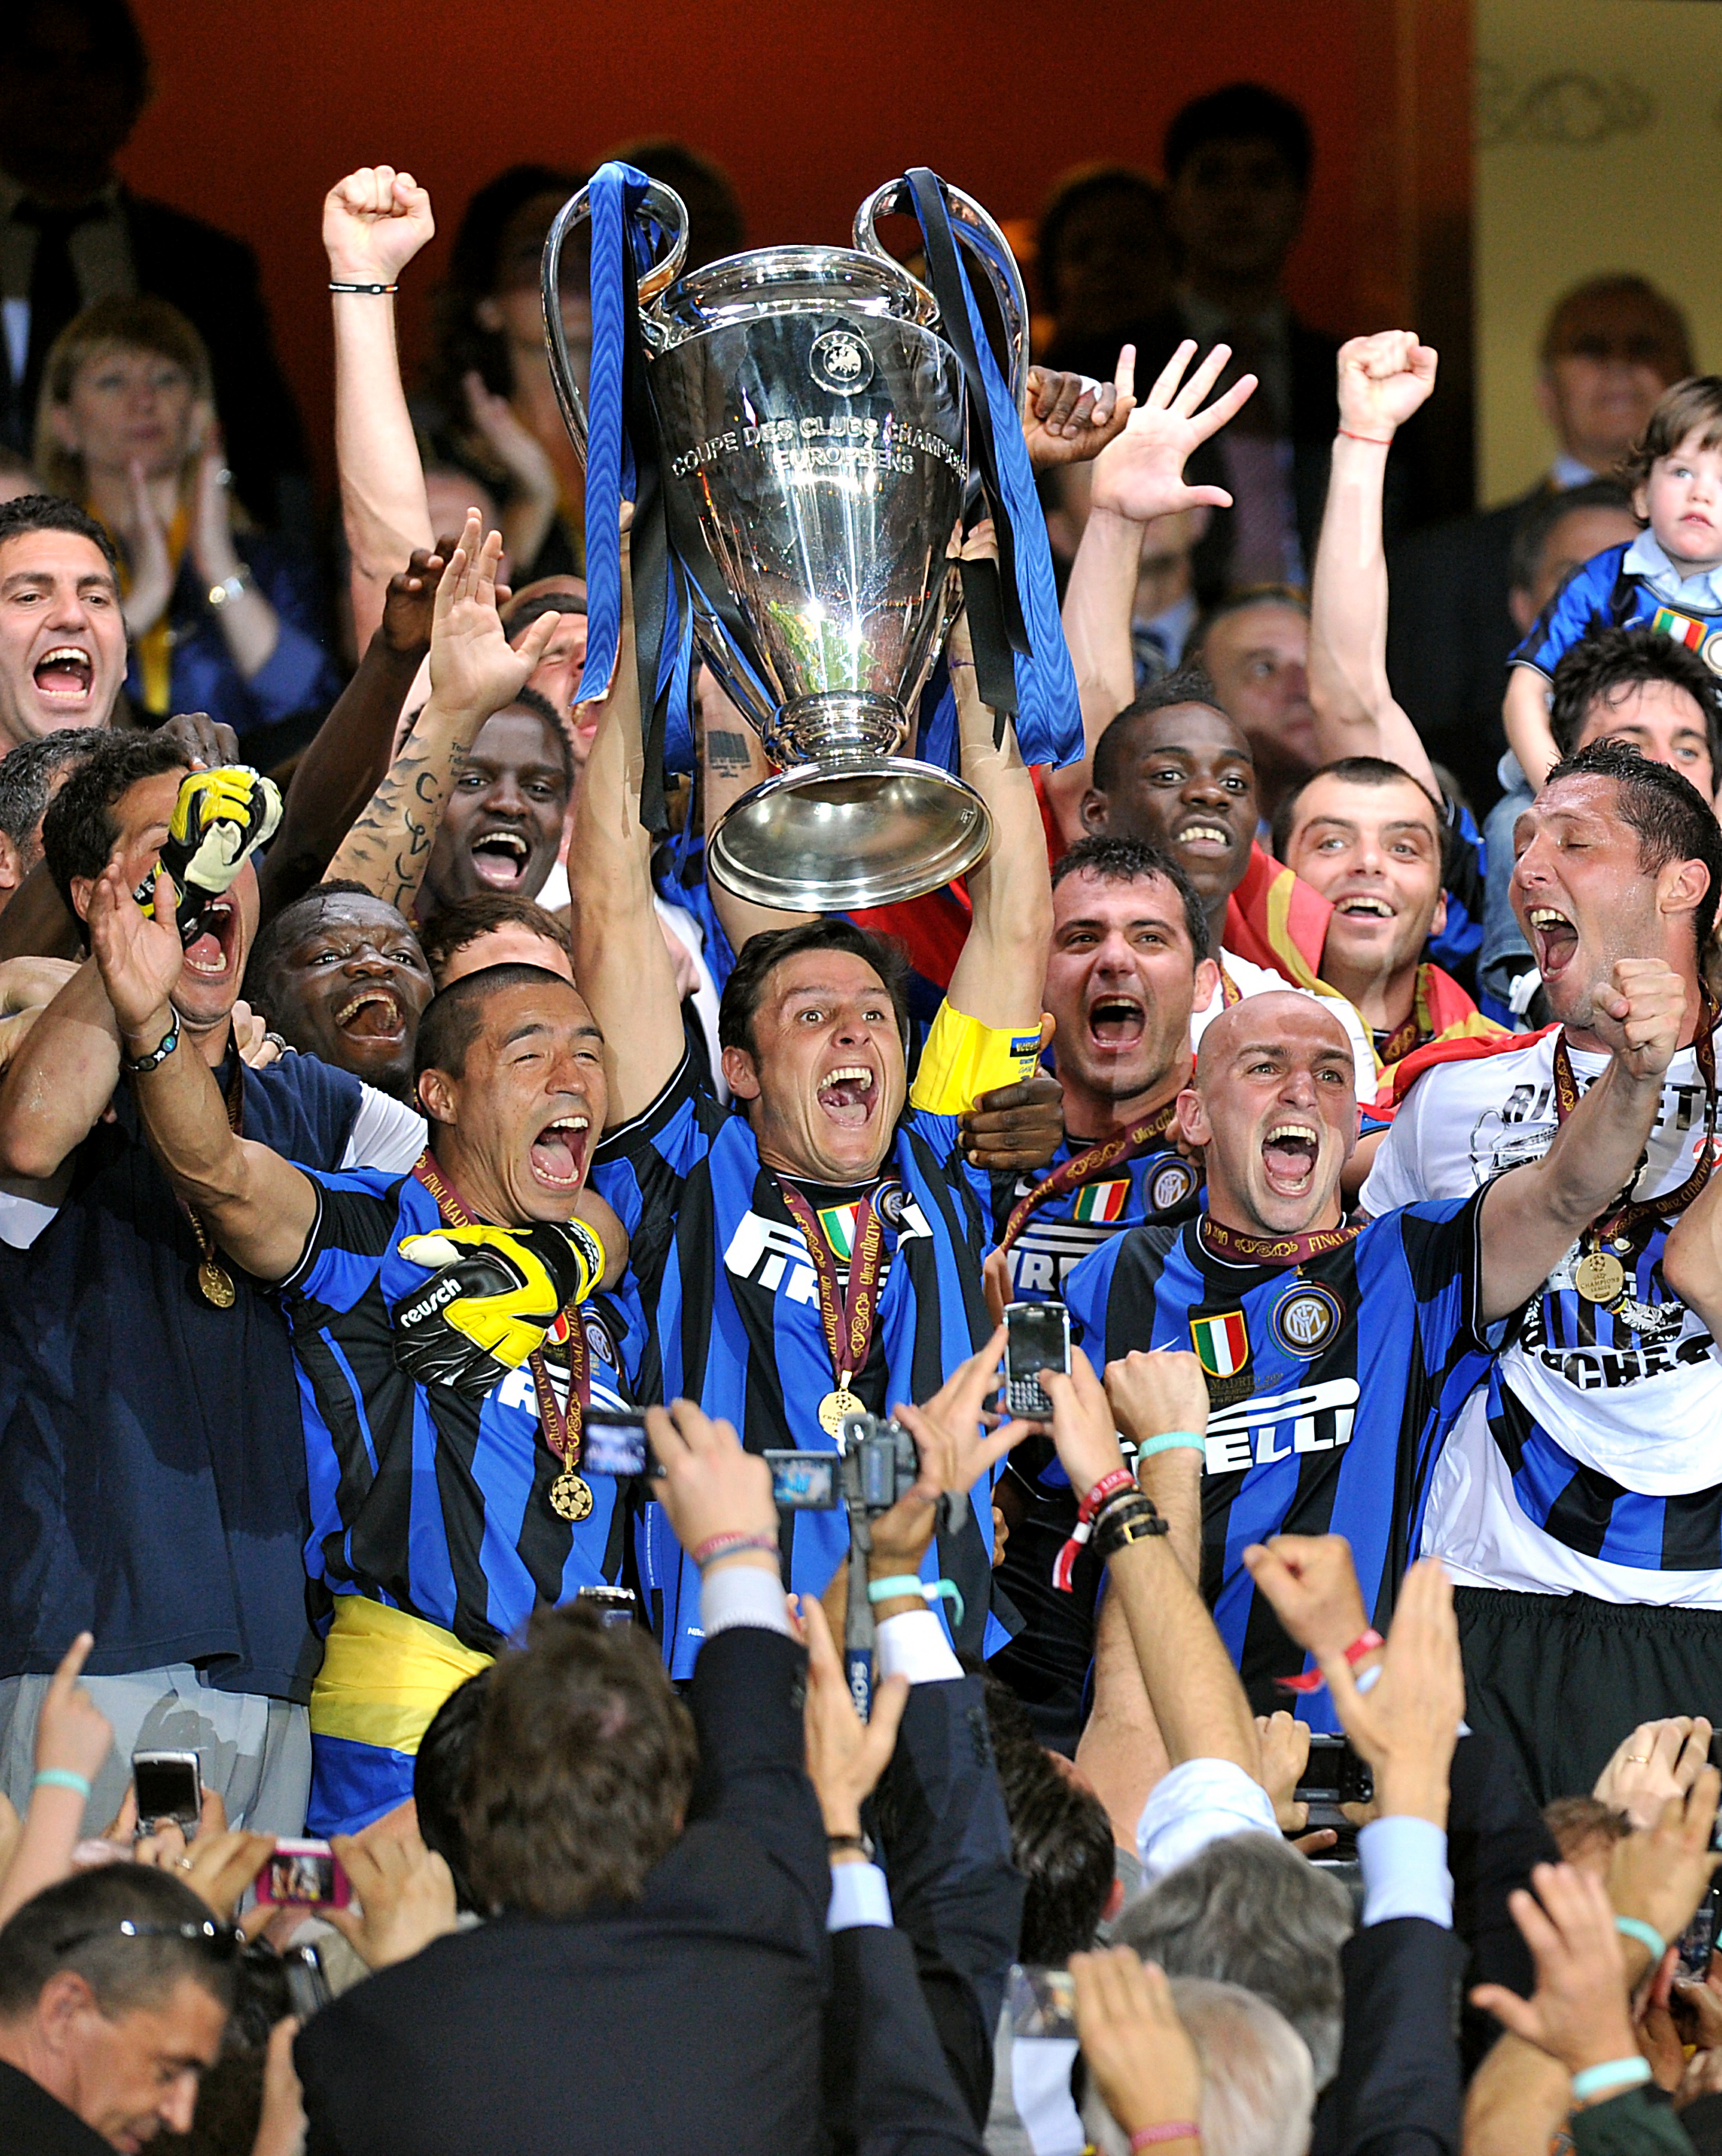 Inter Milan lift the Champions League trophy in 2010